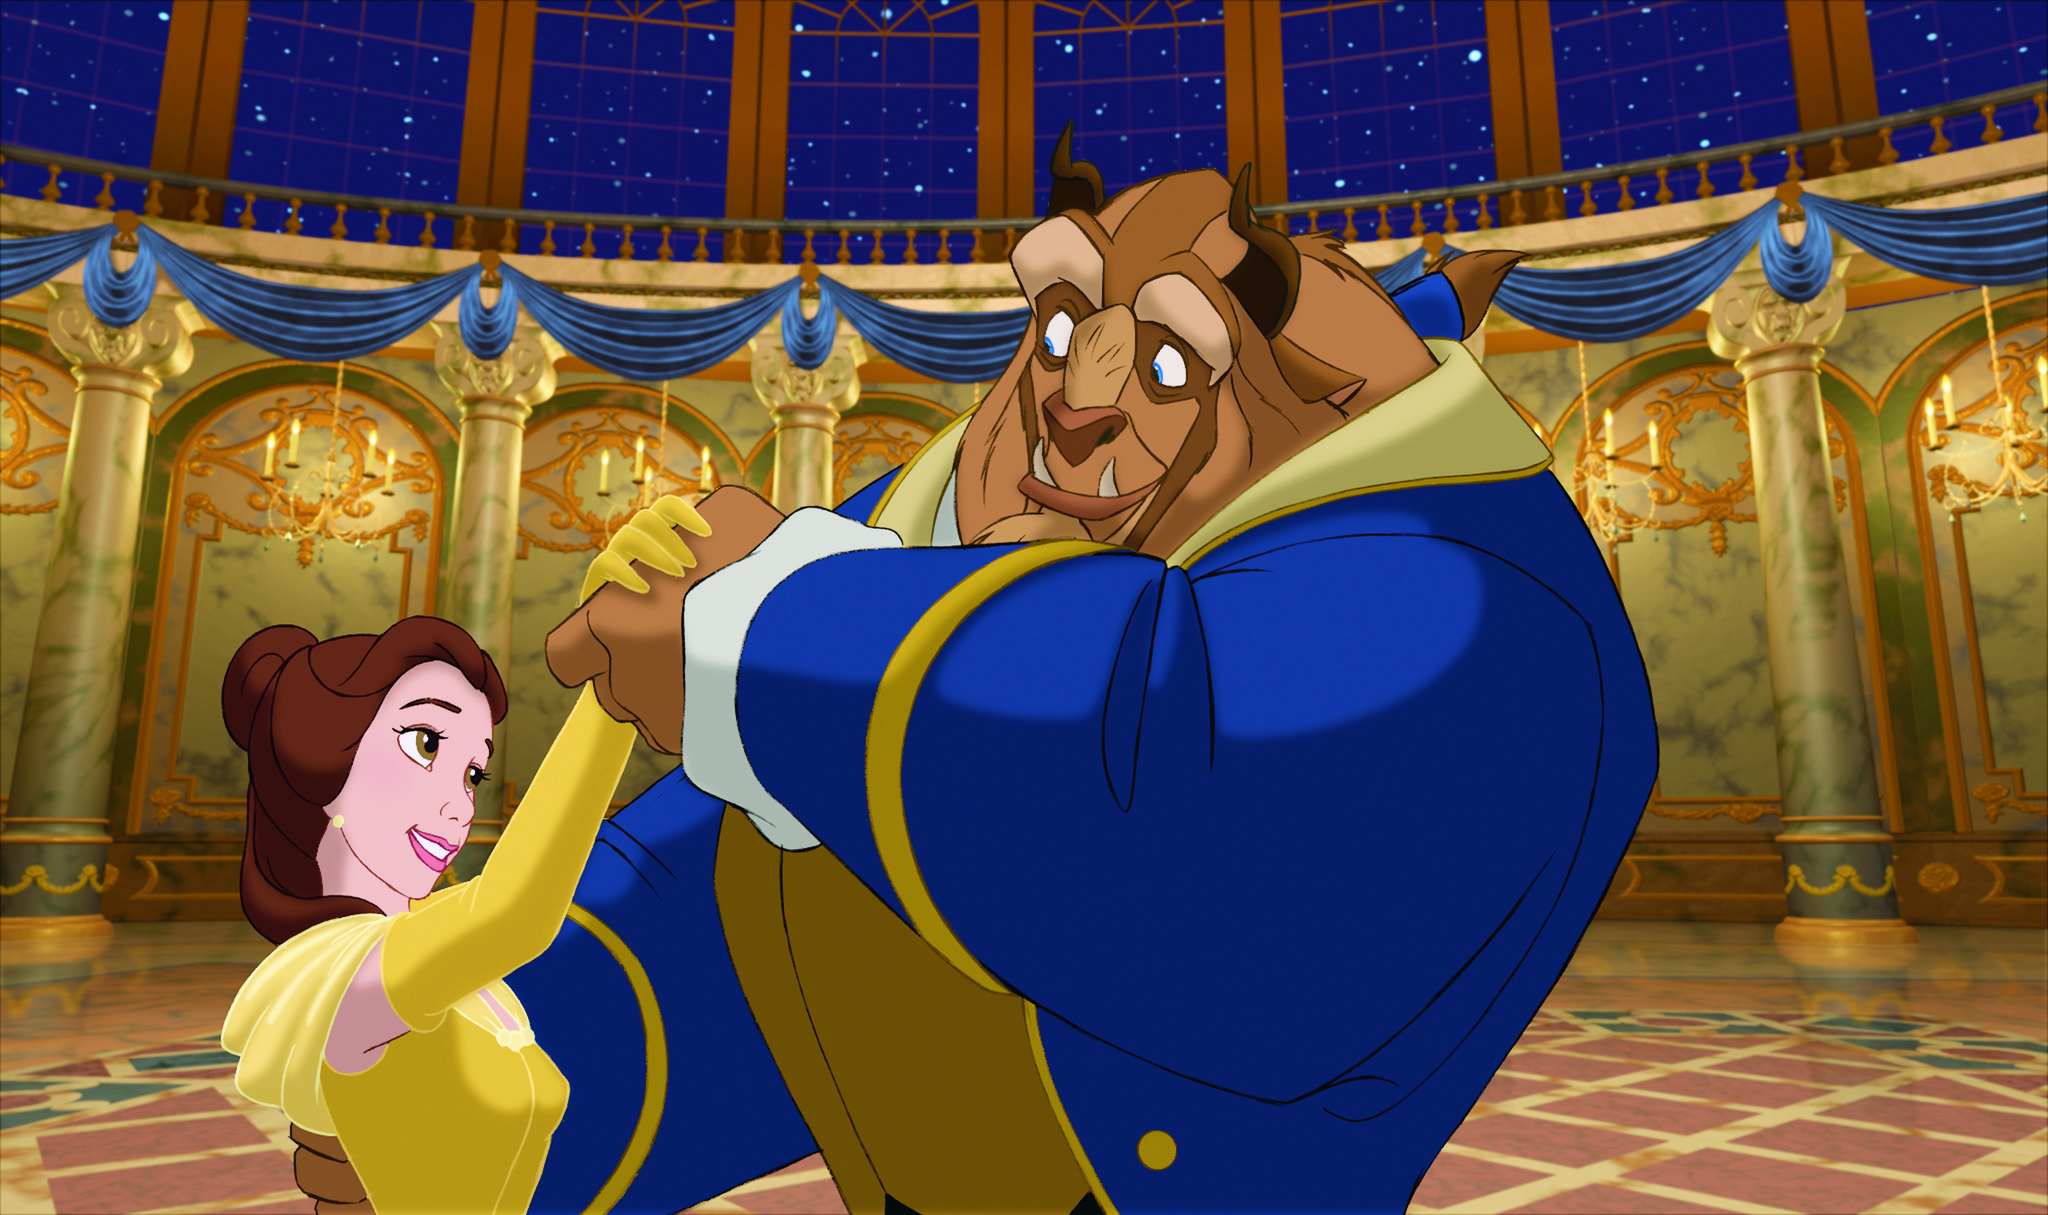 Beauty and the Beast animated movie